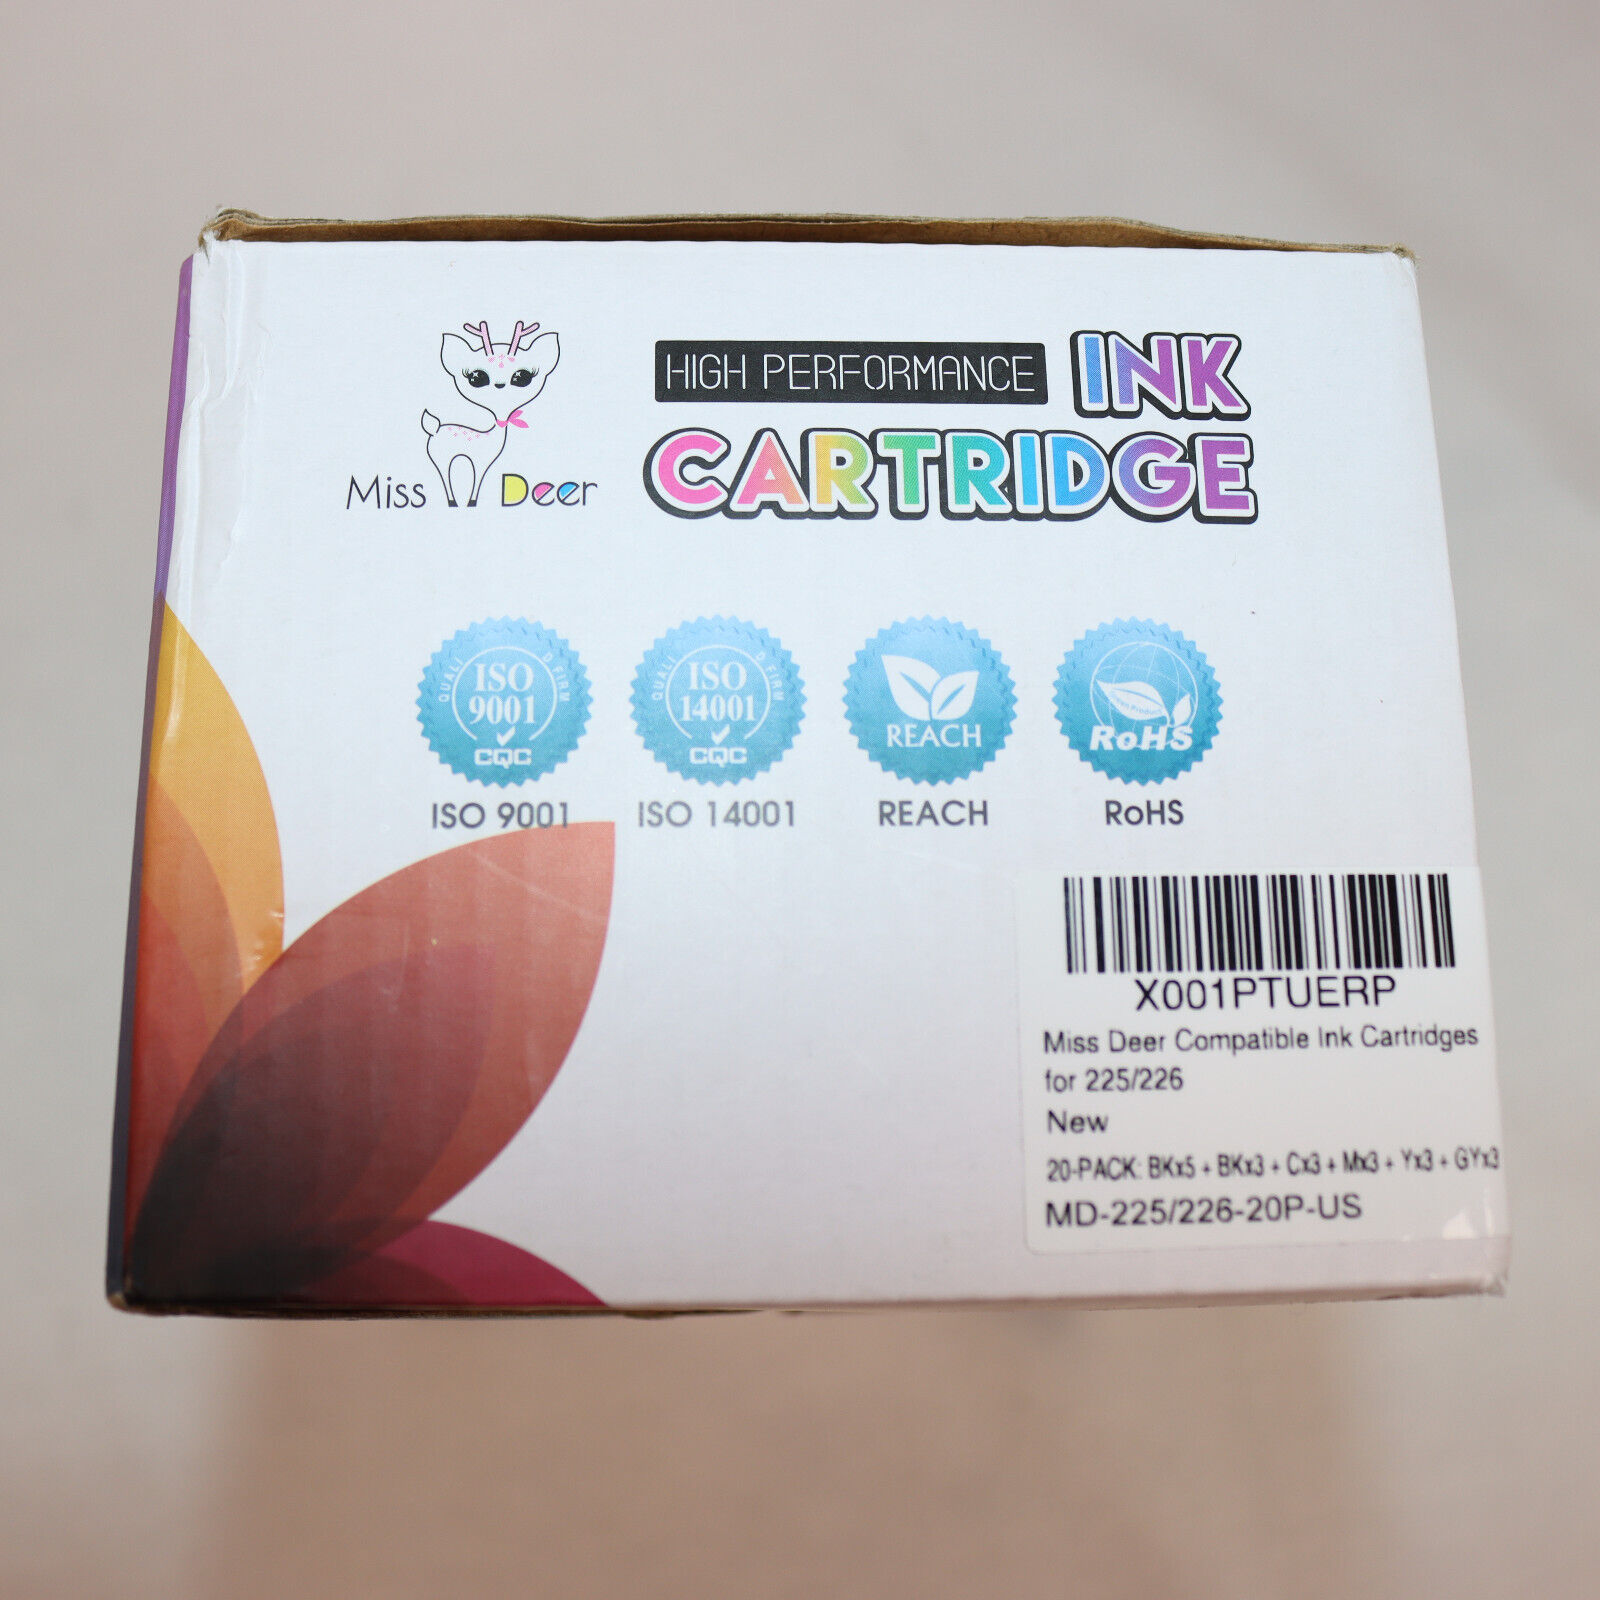 Miss Deer High Performance Ink Cartridges for 225/226 Box of 16